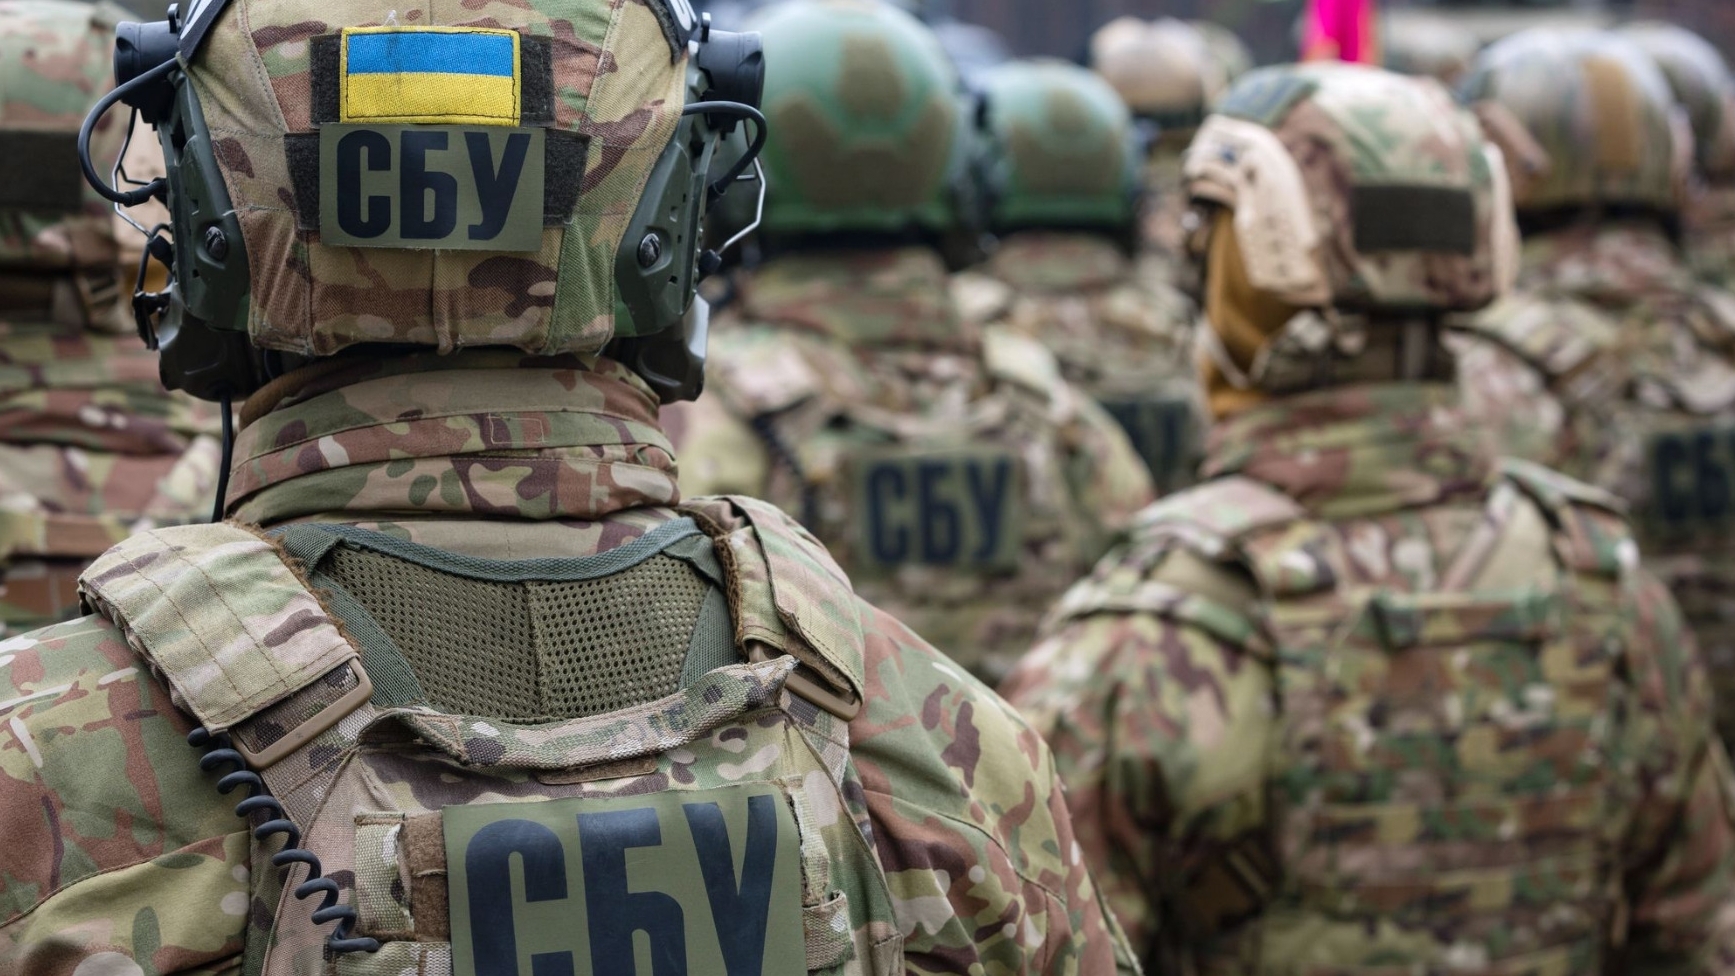 In Zaporozhye, the SBU reported the suspicion of three Ukrainian citizens who held positions in the occupation authorities